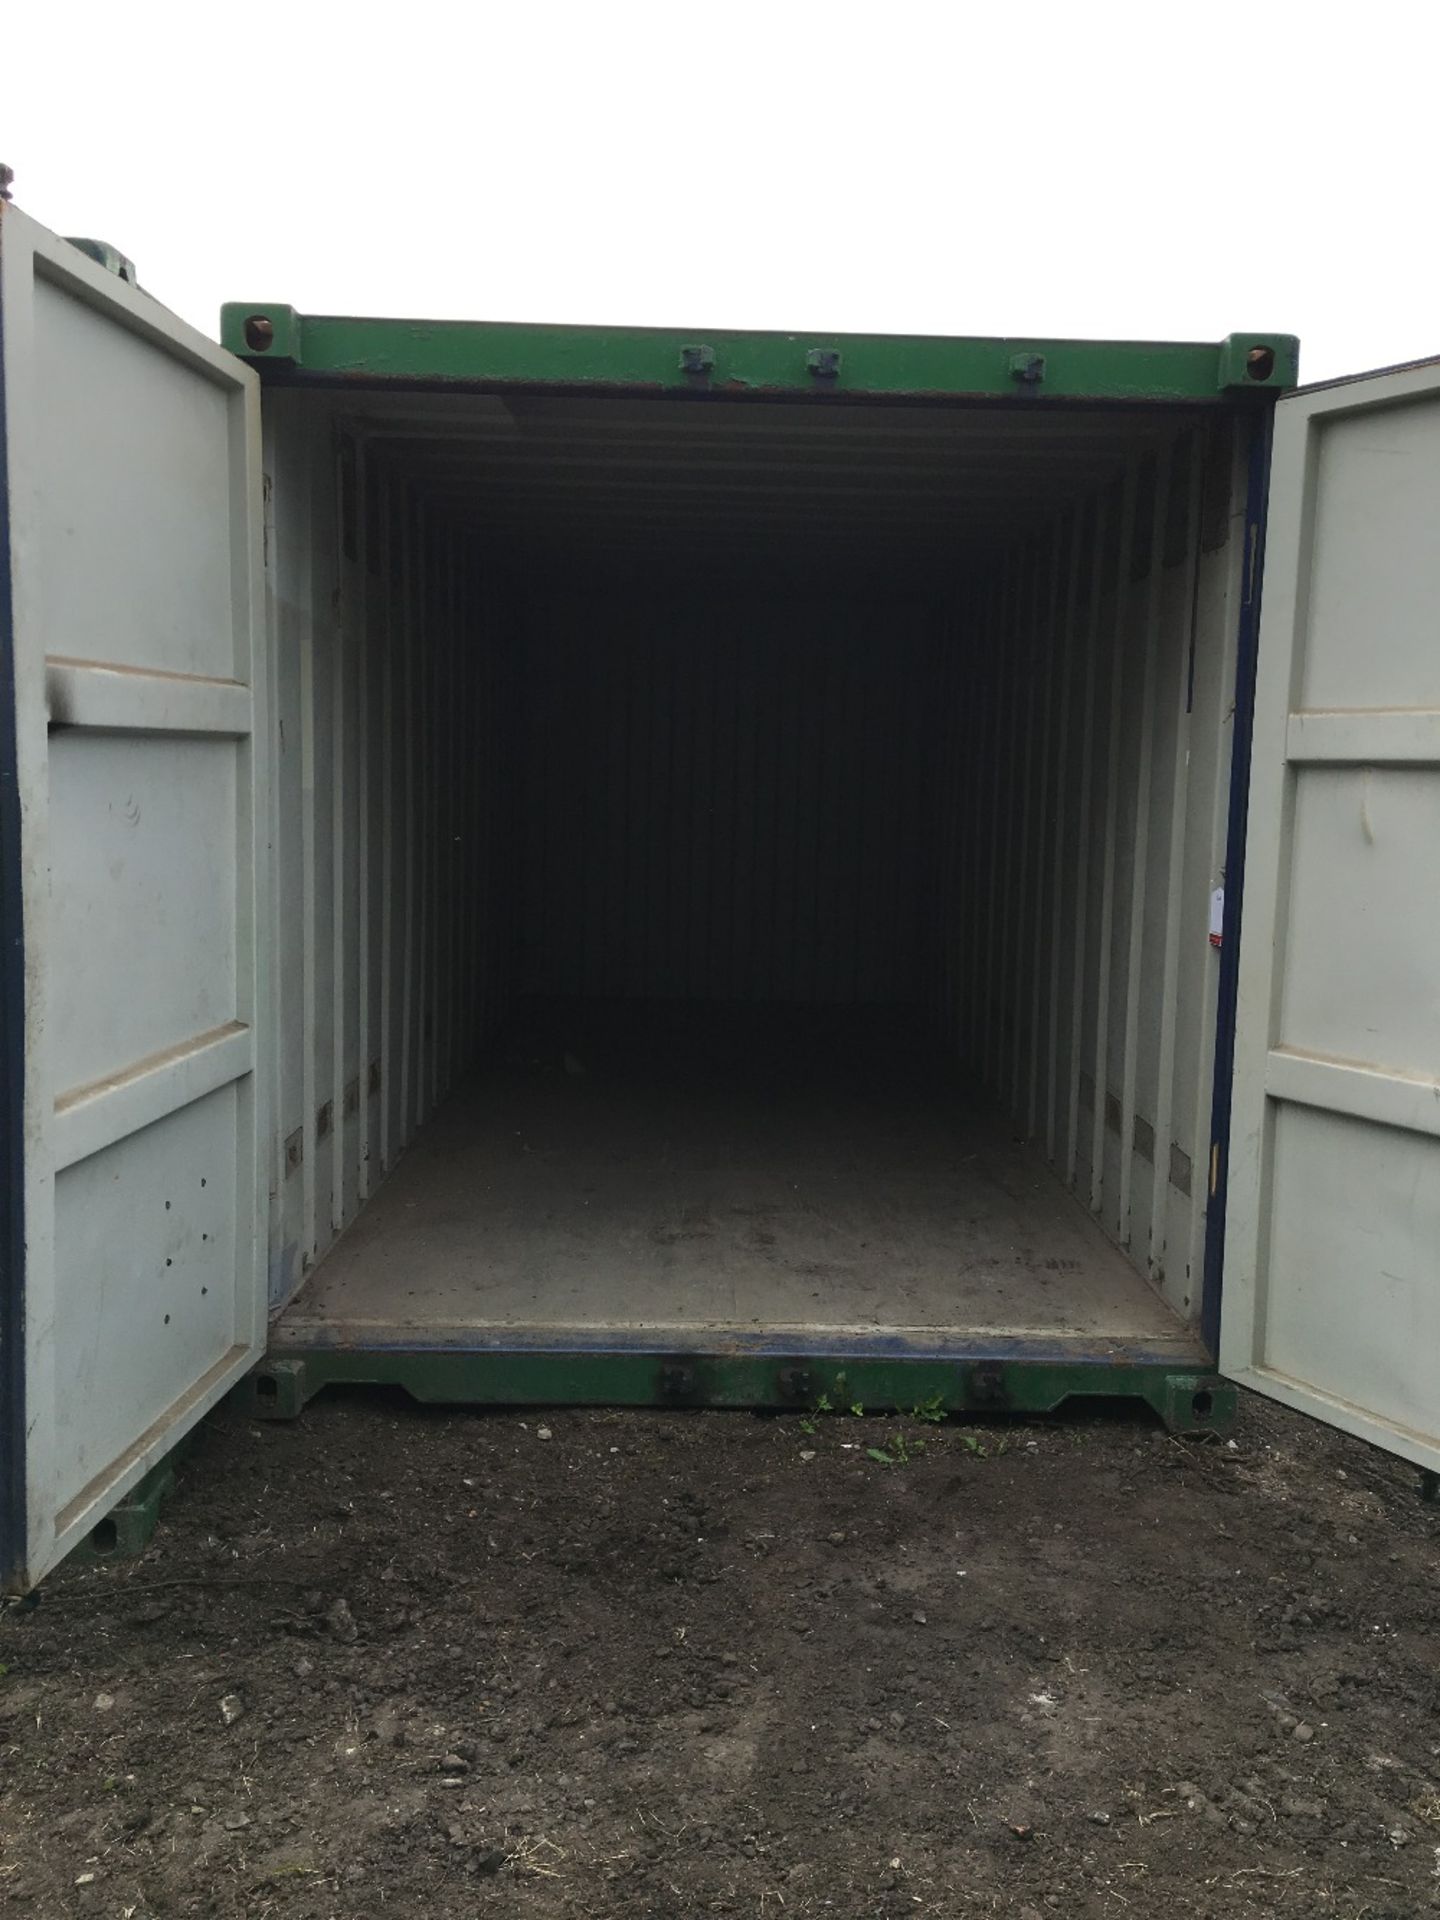 20 x 8 foot double door storage container with locking box B7 - Image 3 of 4